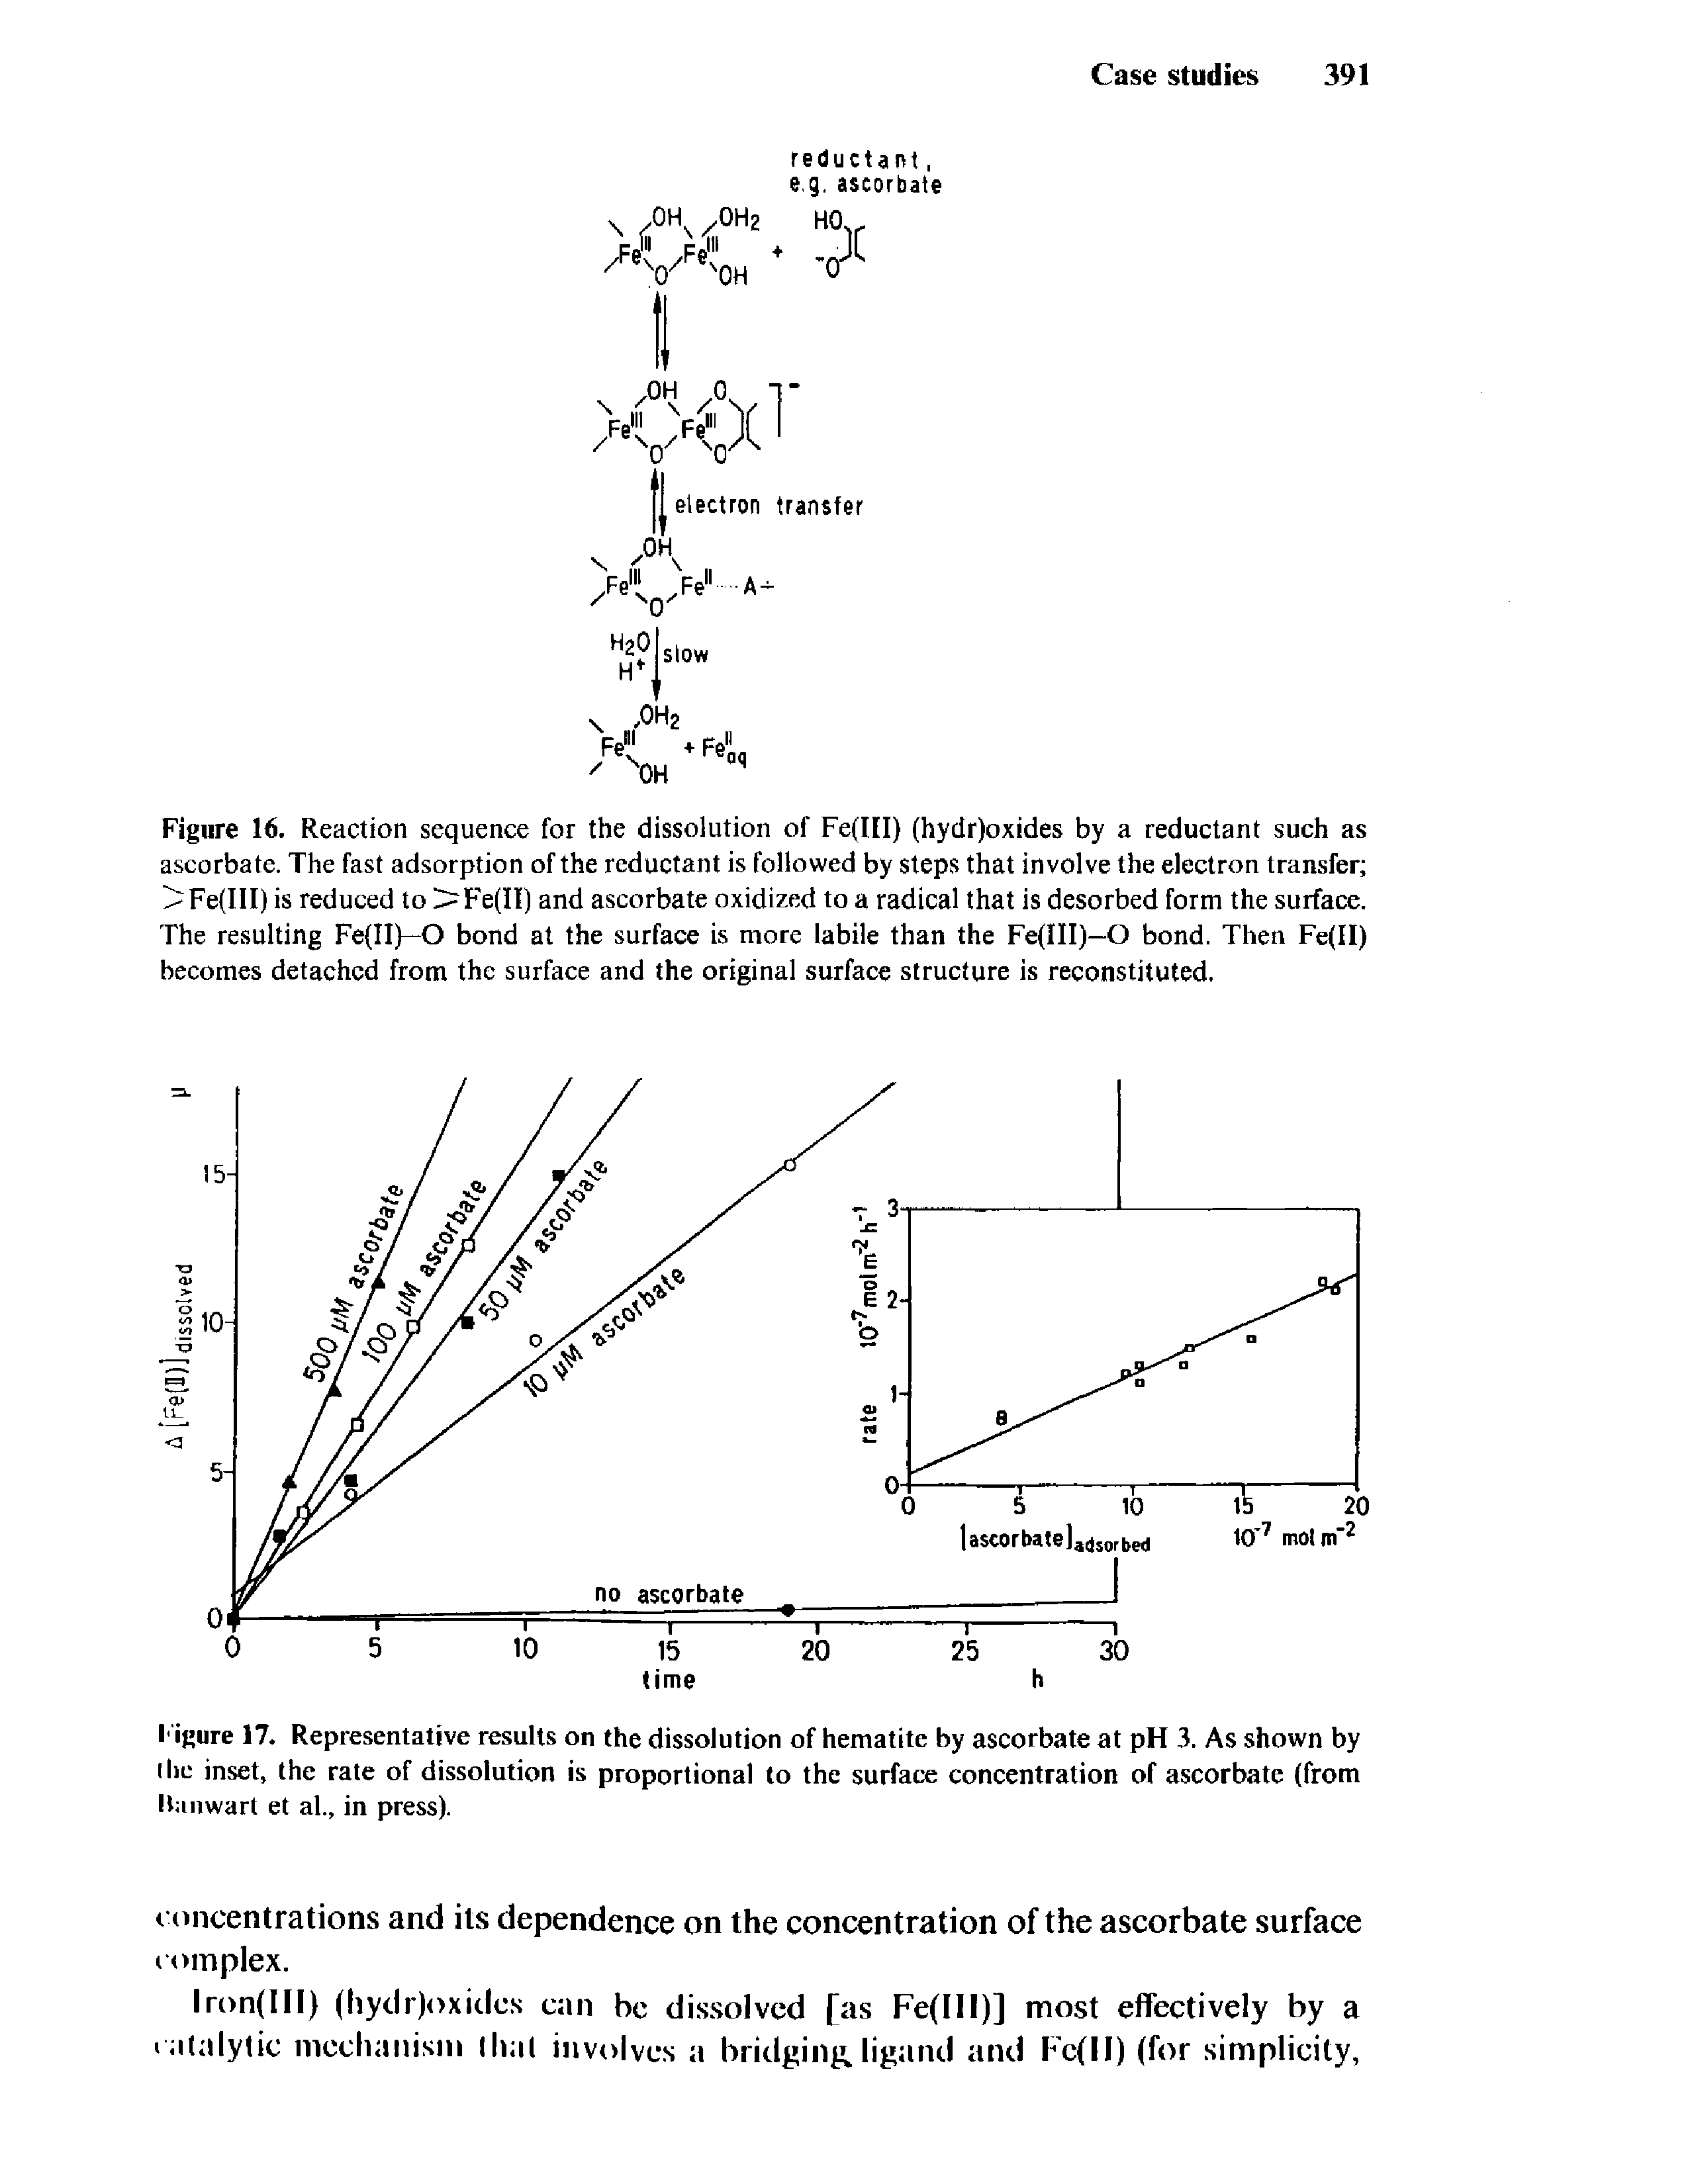 Figure 16. Reaction sequence for the dissolution of Fe(III) (hydr)oxides by a reductant such as ascorbate. The fast adsorption of the reductant is followed by steps that involve the electron transfer Fe(III) is reduced to >Fe(II) and ascorbate oxidized to a radical that is desorbed form the surface. The resulting Fe II)—O bond at the surface is more labile than the Fe(III)—O bond. Then Fe(II) becomes detached from the surface and the original surface structure is reconstituted.